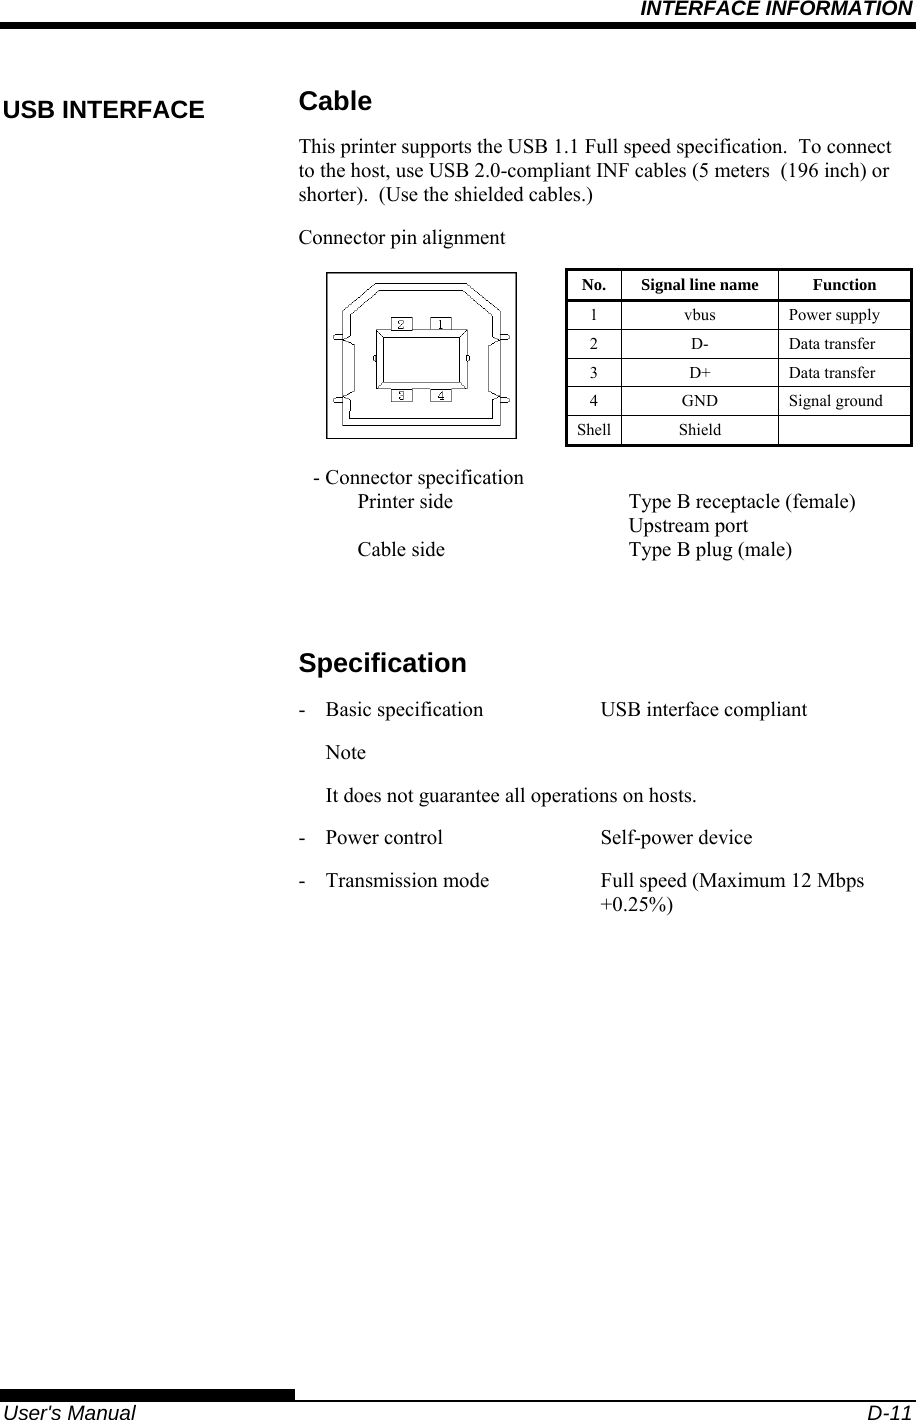 INTERFACE INFORMATION    User&apos;s Manual  D-11 Cable This printer supports the USB 1.1 Full speed specification.  To connect to the host, use USB 2.0-compliant INF cables (5 meters  (196 inch) or shorter).  (Use the shielded cables.) Connector pin alignment  No. Signal line name  Function 1 vbus Power supply 2 D- Data transfer 3 D+ Data transfer 4 GND Signal ground Shell Shield   - Connector specification Printer side  Cable side  Type B receptacle (female) Upstream port Type B plug (male)  Specification -  Basic specification  USB interface compliant  Note   It does not guarantee all operations on hosts. -  Power control  Self-power device -  Transmission mode  Full speed (Maximum 12 Mbps     +0.25%) USB INTERFACE 